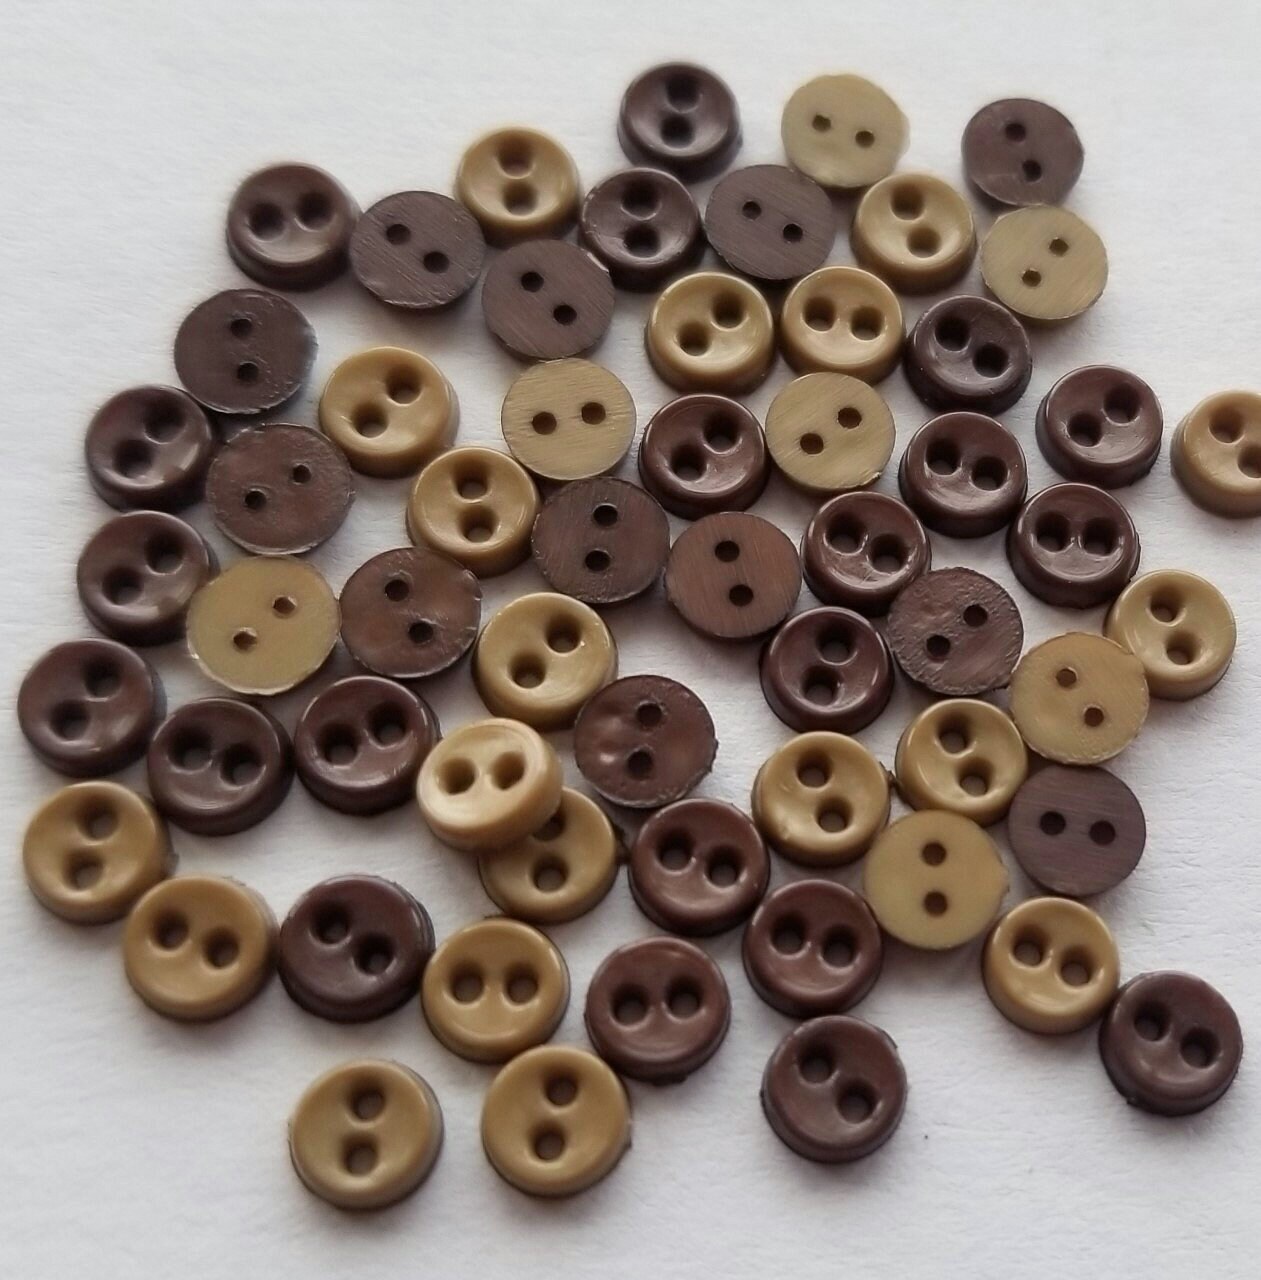 B019 Mini 3mm 4mm Metal Buttons Doll Clothes Sewing Craft Supply